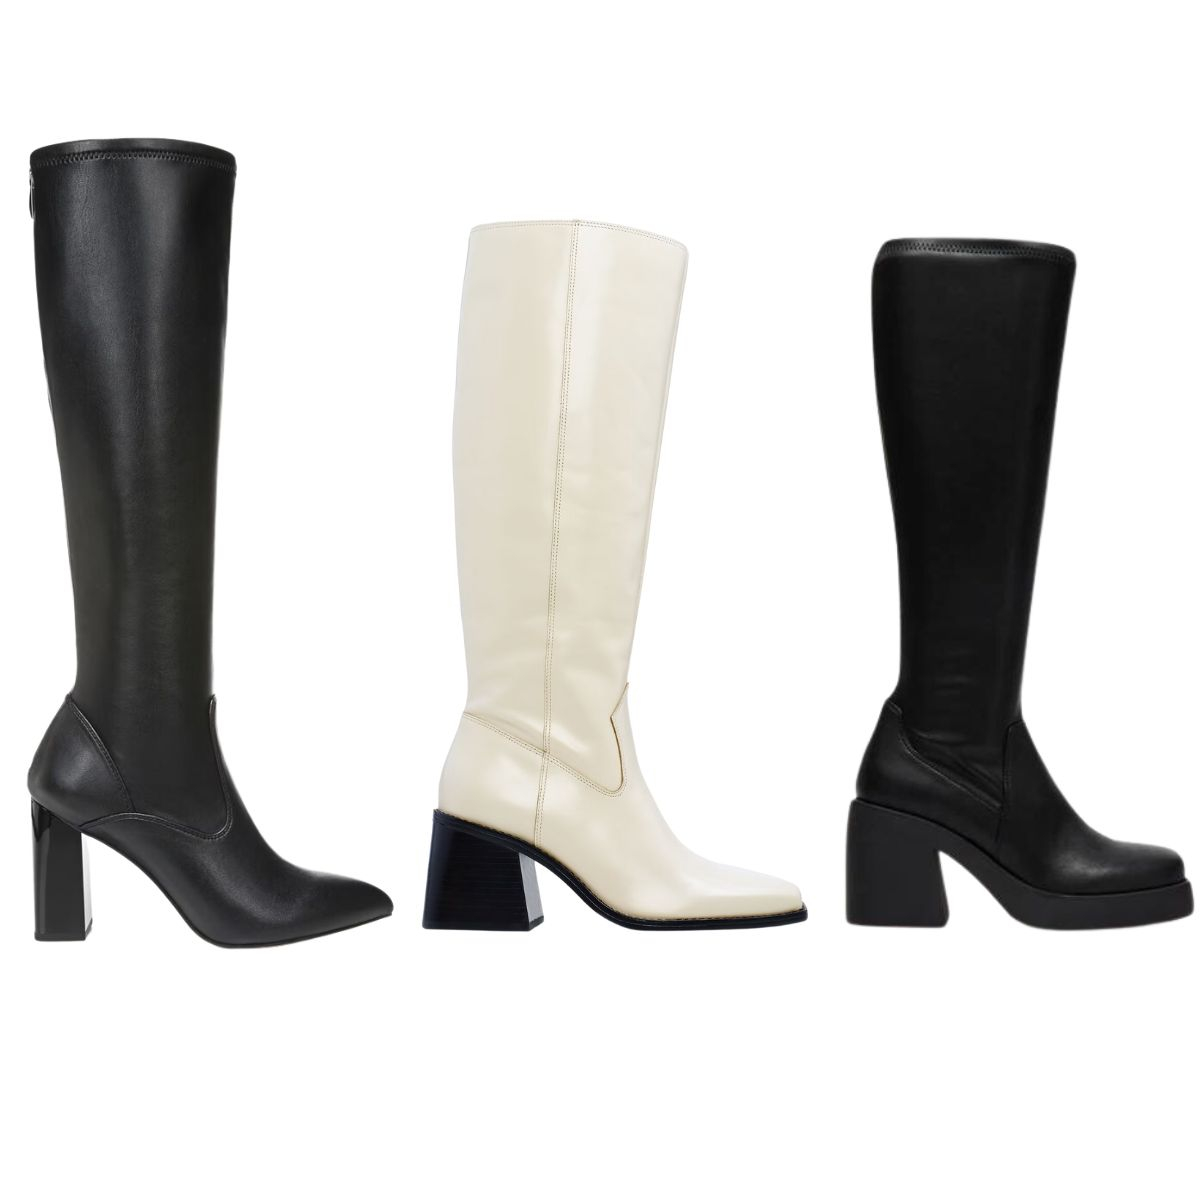 How to Shop for Wide Calf Boots